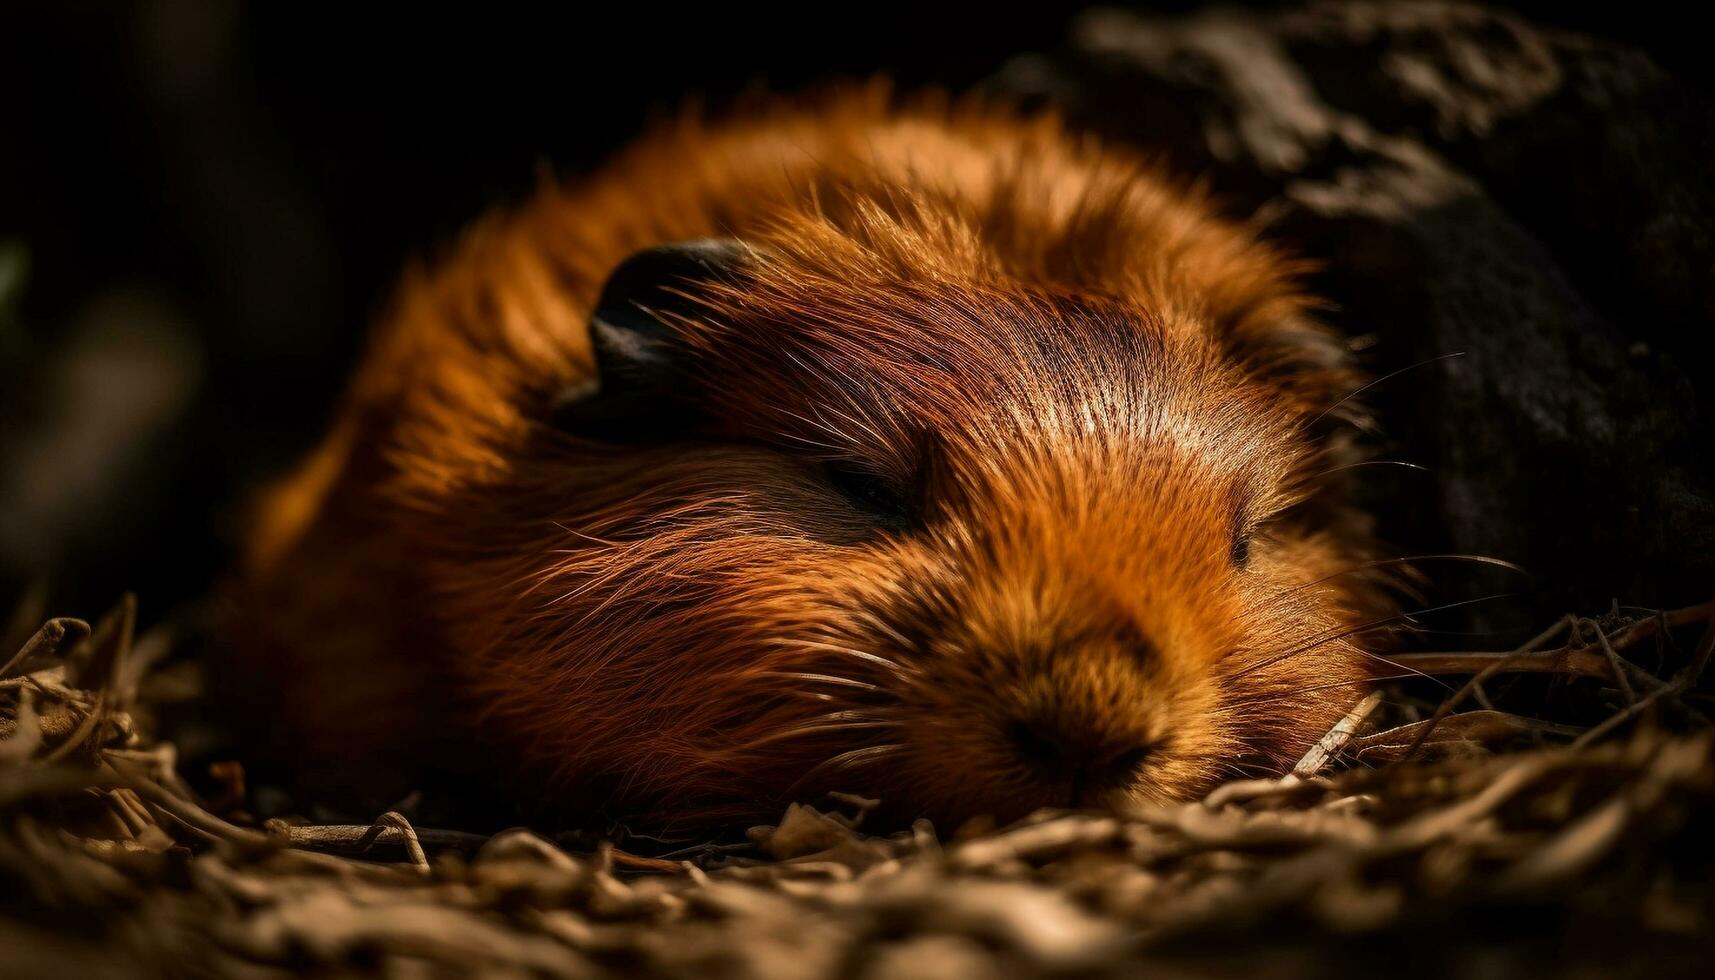 Fluffy guinea pig with whiskers lying on grass, looking cute generated by AI photo